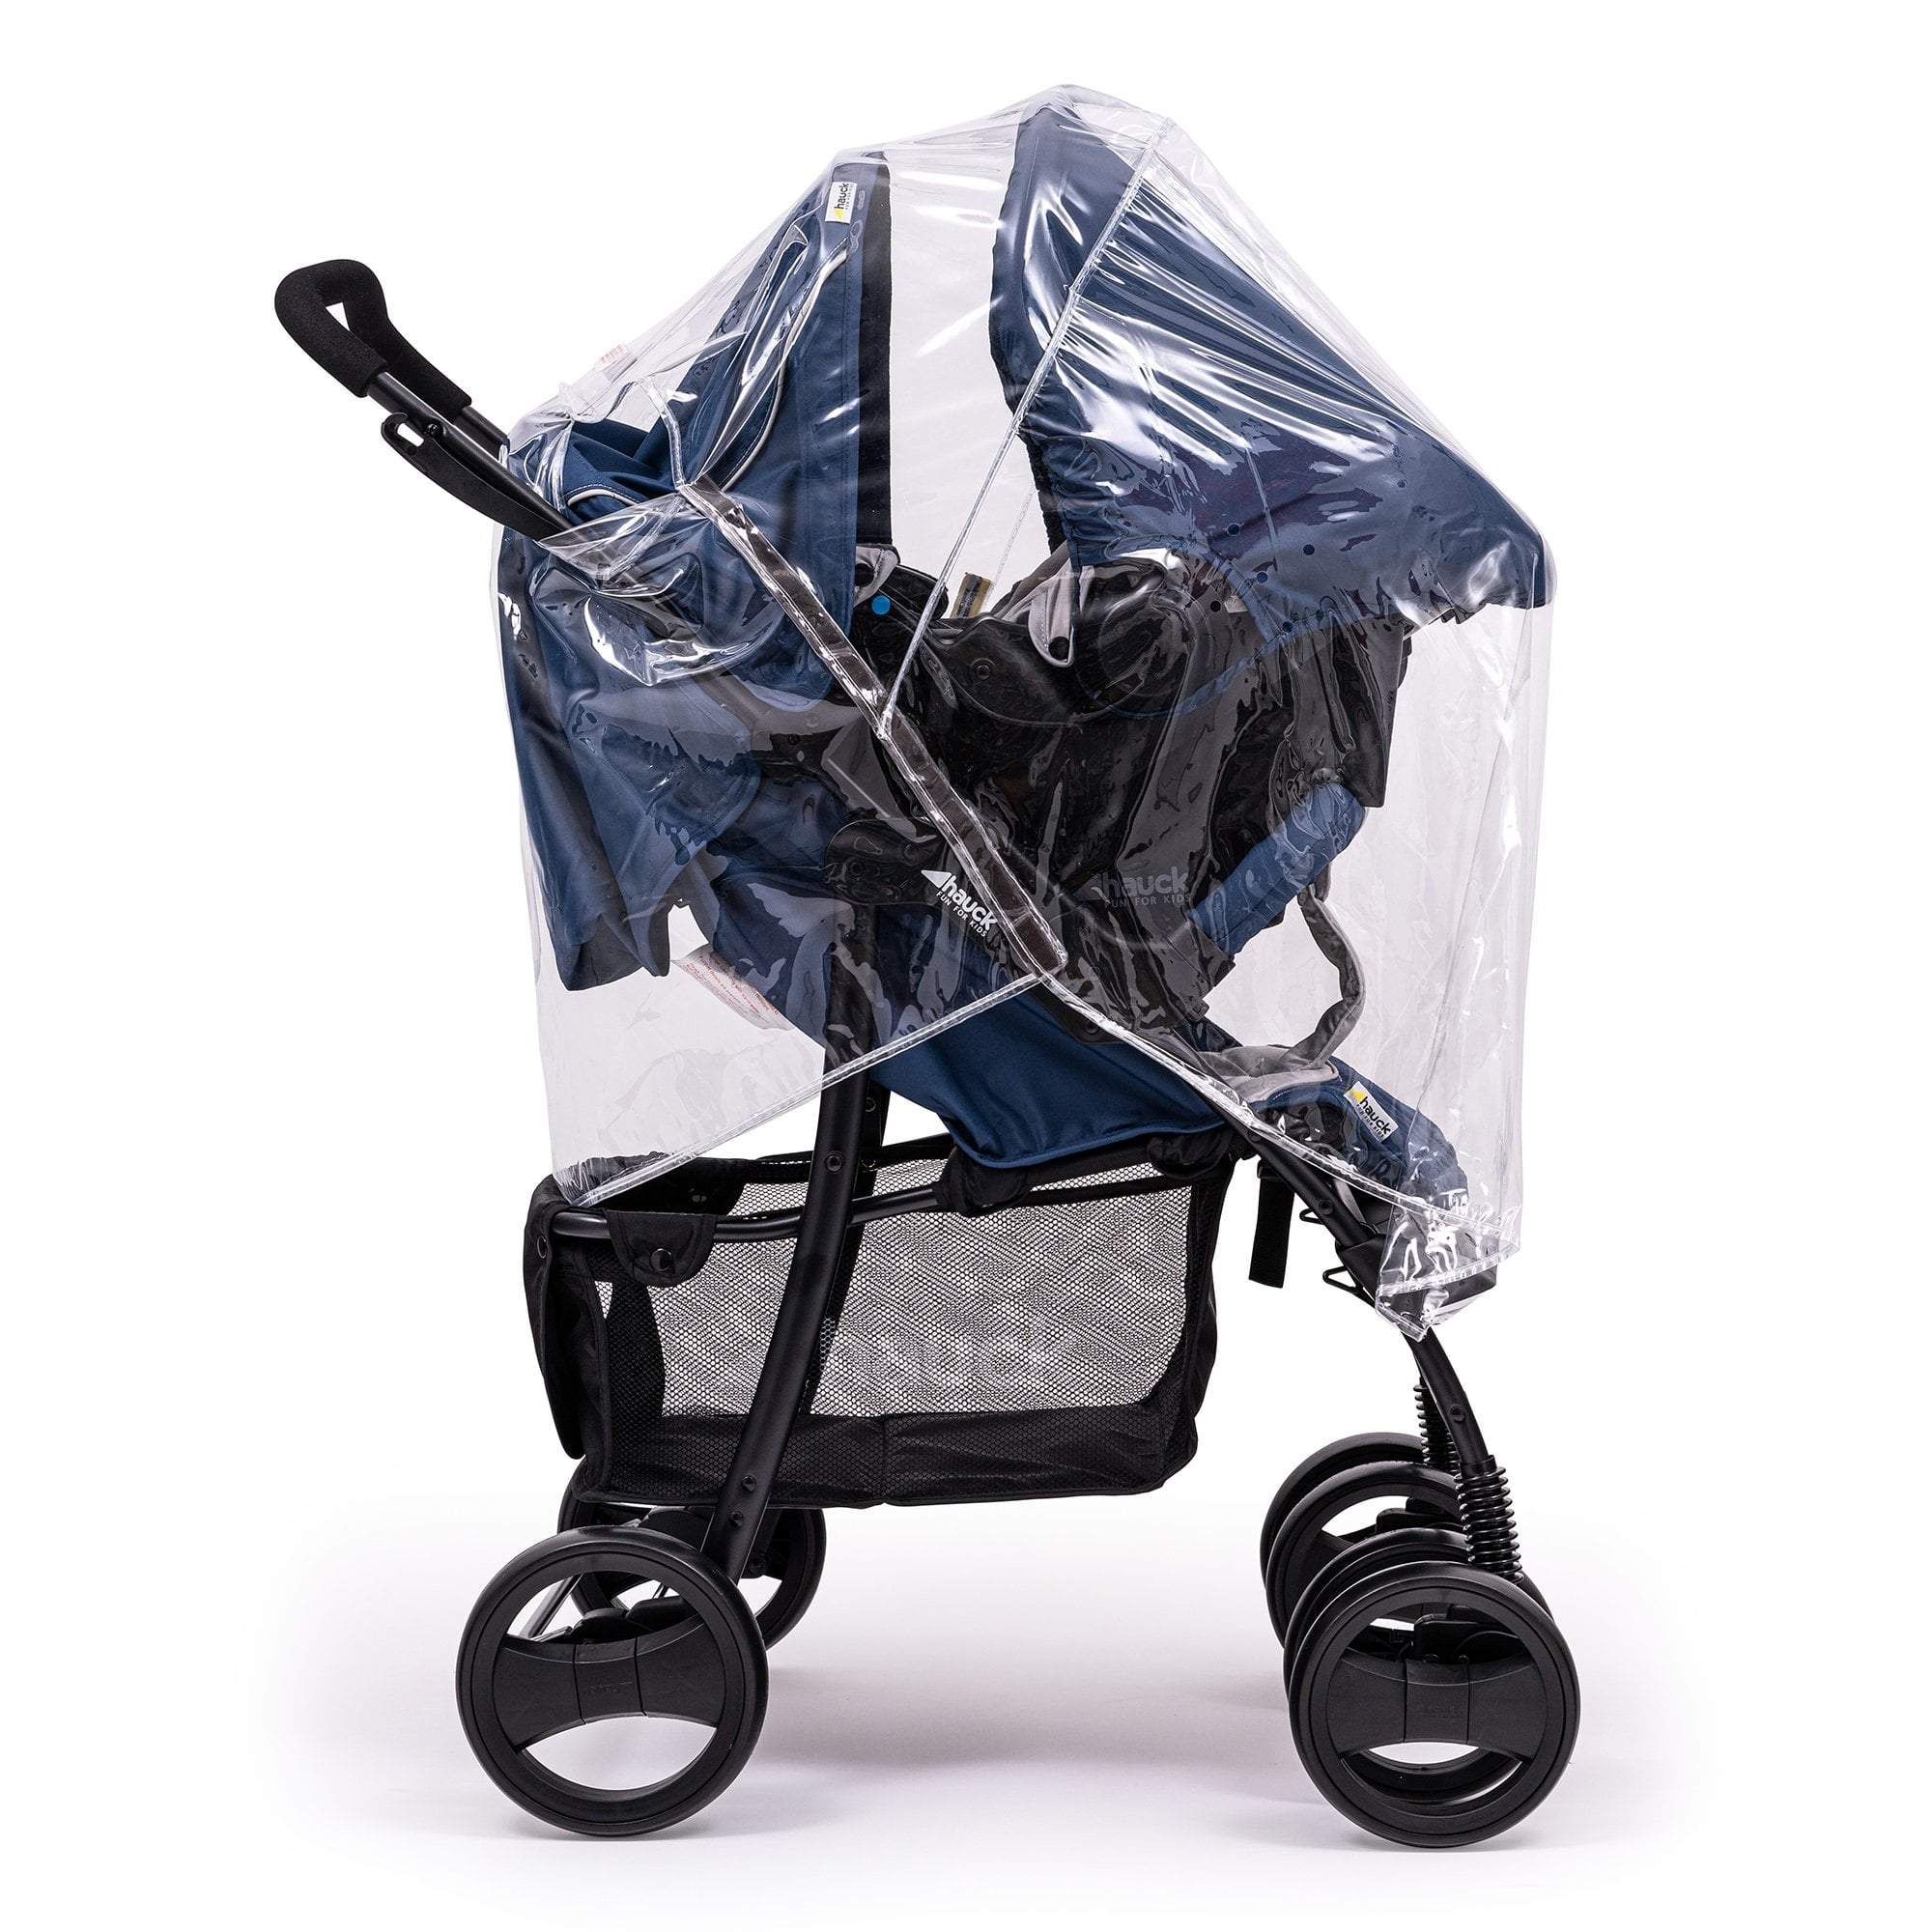 Travel System Raincover Compatible with Nurse - Fits All Models - For Your Little One